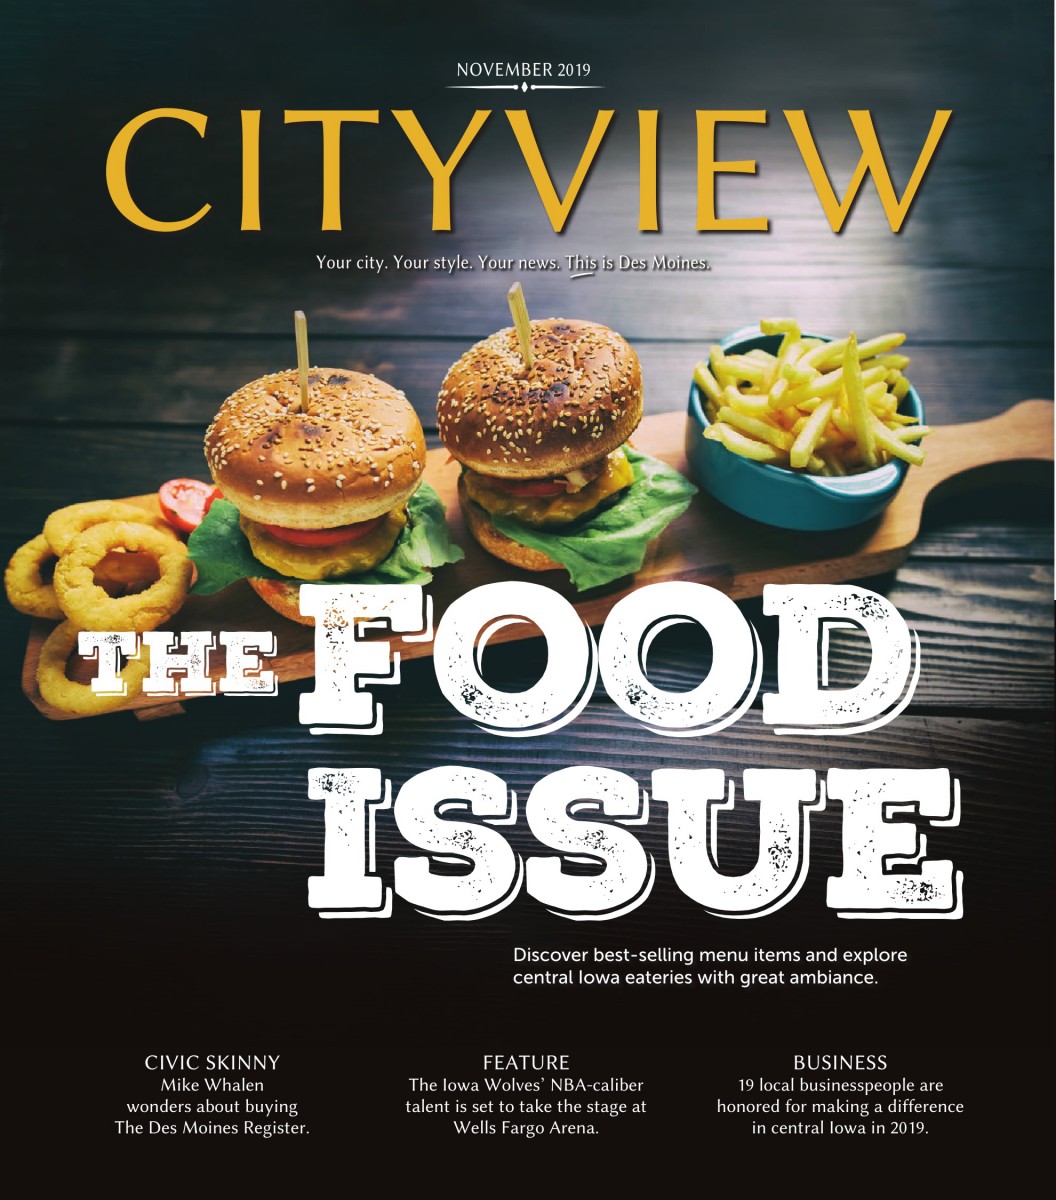 http://www.dmcityview.com/CityviewNovember2019/files/pages/tablet/1.jpg